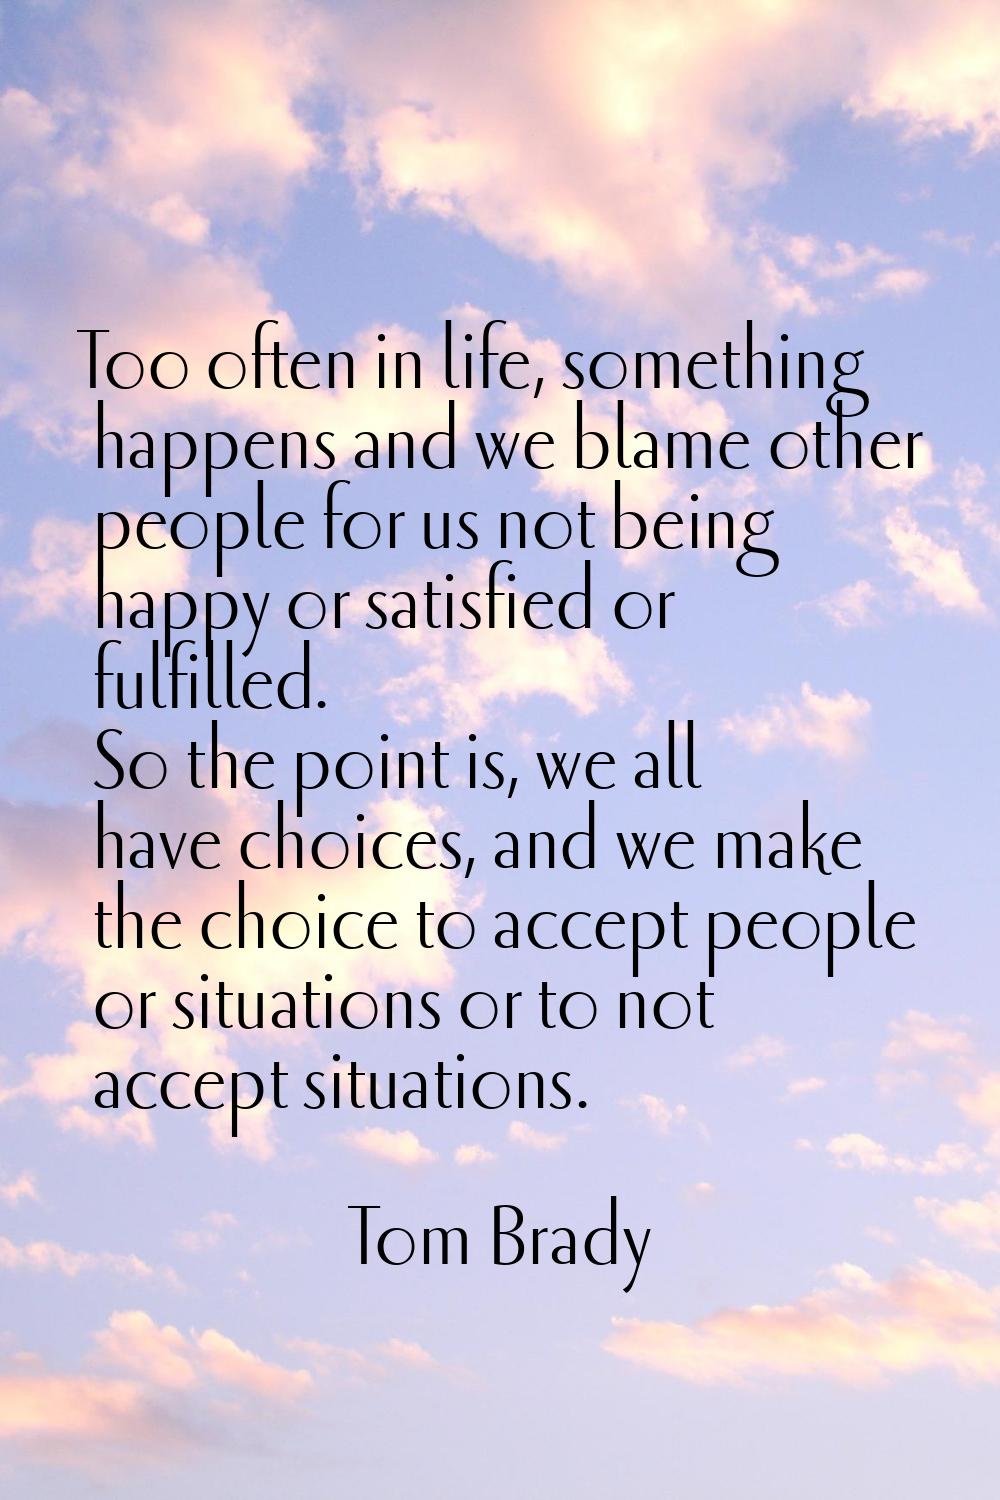 Too often in life, something happens and we blame other people for us not being happy or satisfied 